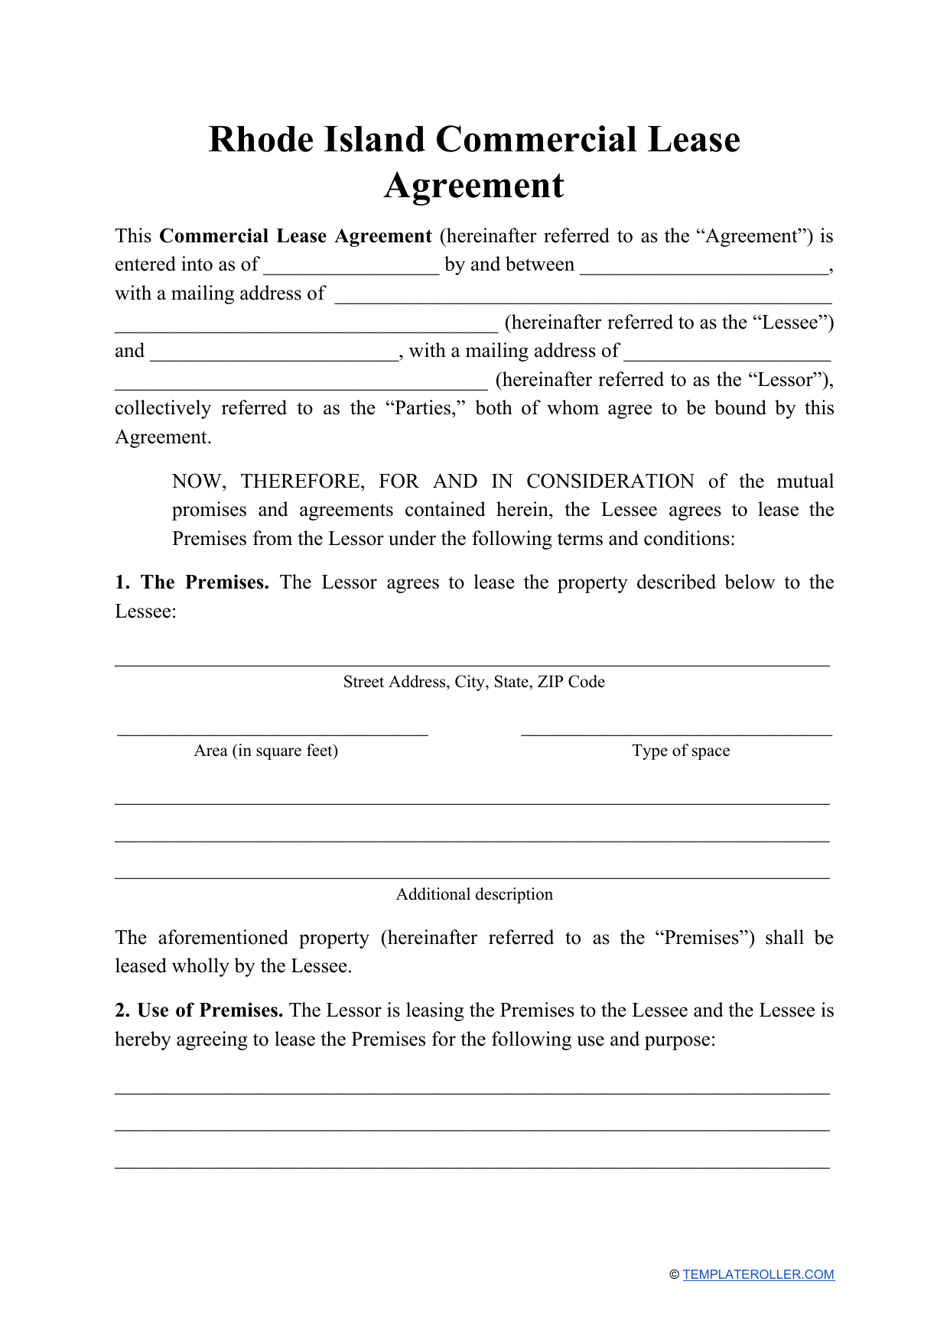 Commercial Lease Agreement Template - Rhode Island, Page 1